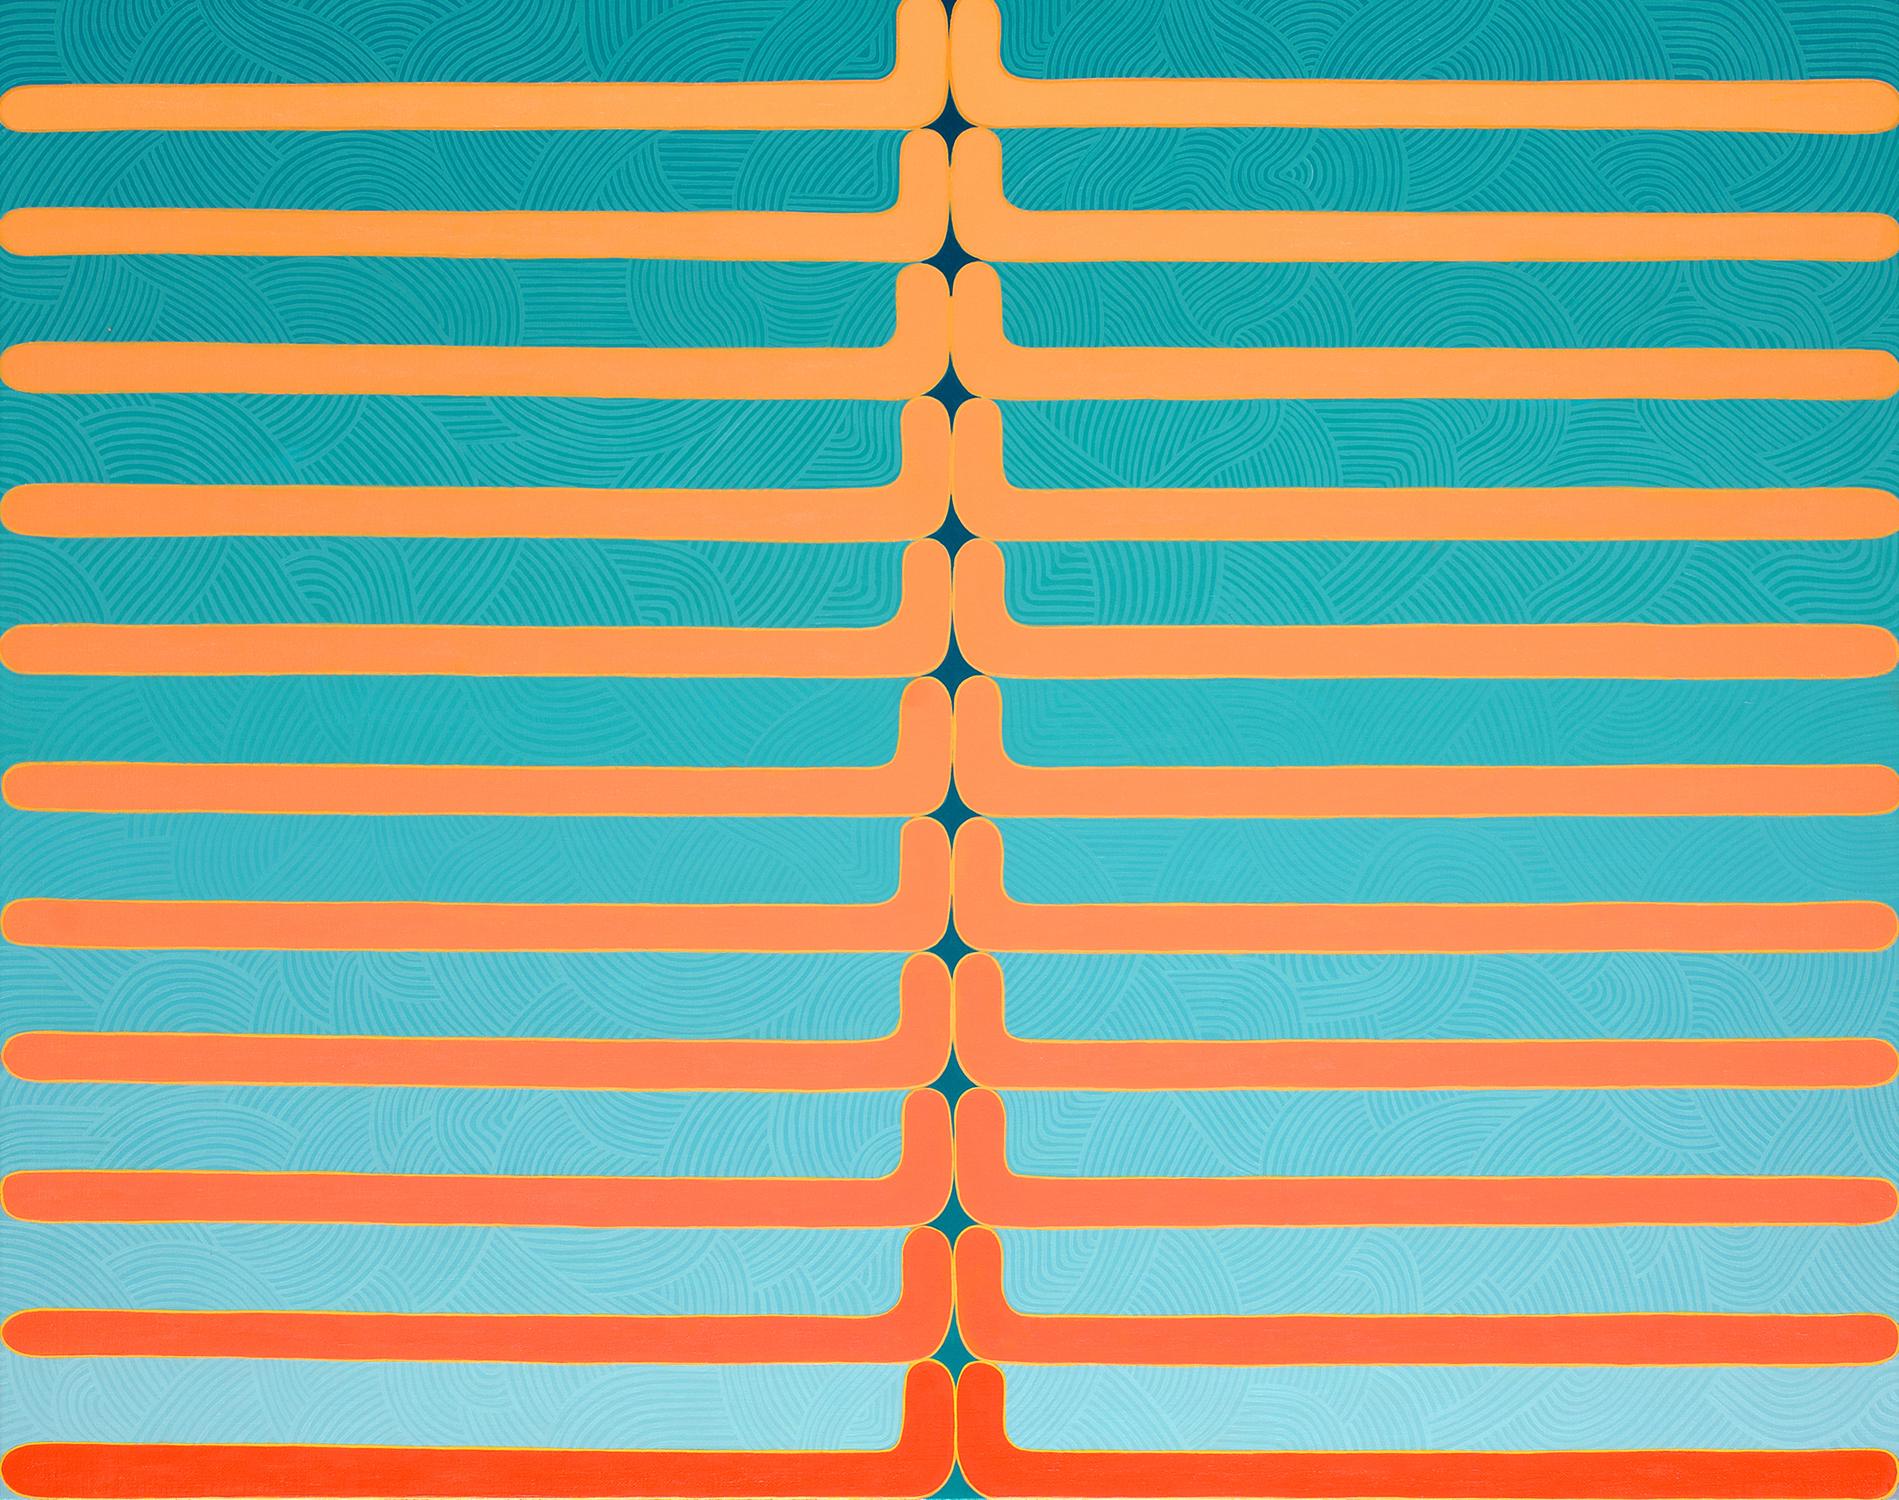 Jenny Kemp Abstract Painting - Sun Salutations, Blue Teal Orange Coral Peach Geometric Abstract Patterns